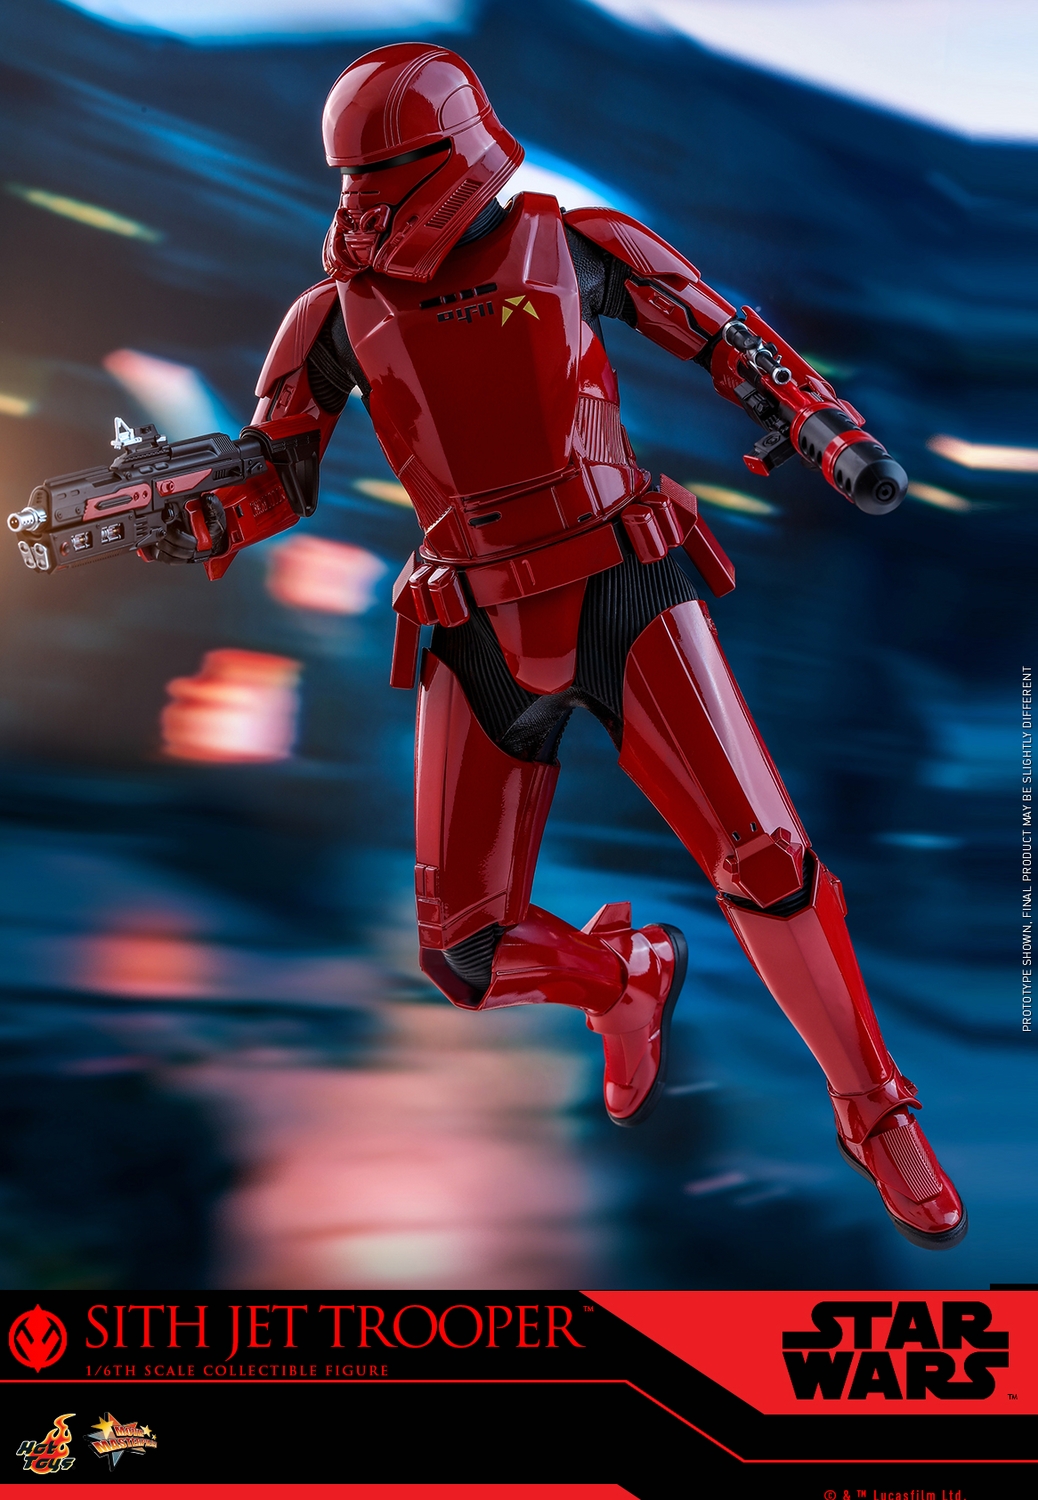 hot-toys-sith-jet-trooper-collectible-figure-121219-012.jpg